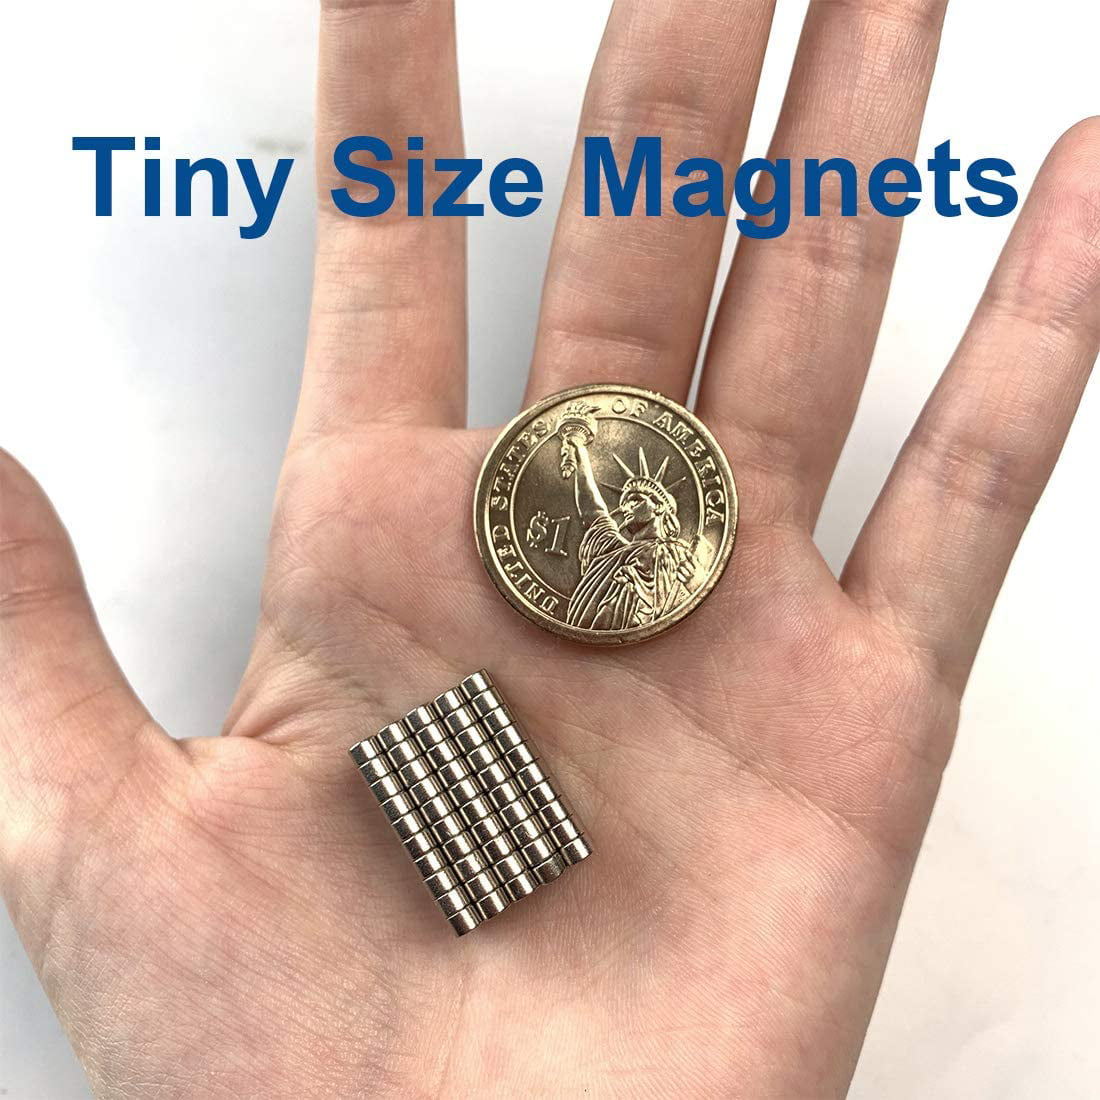 MEALOS Magnets 3mmx2mm Magnets for Warhammer for Gaslands Miniatures Small Models Come with a Storage Case 200 Tiny Magnets Mini Magnets Small Round Magnets for Crafts 